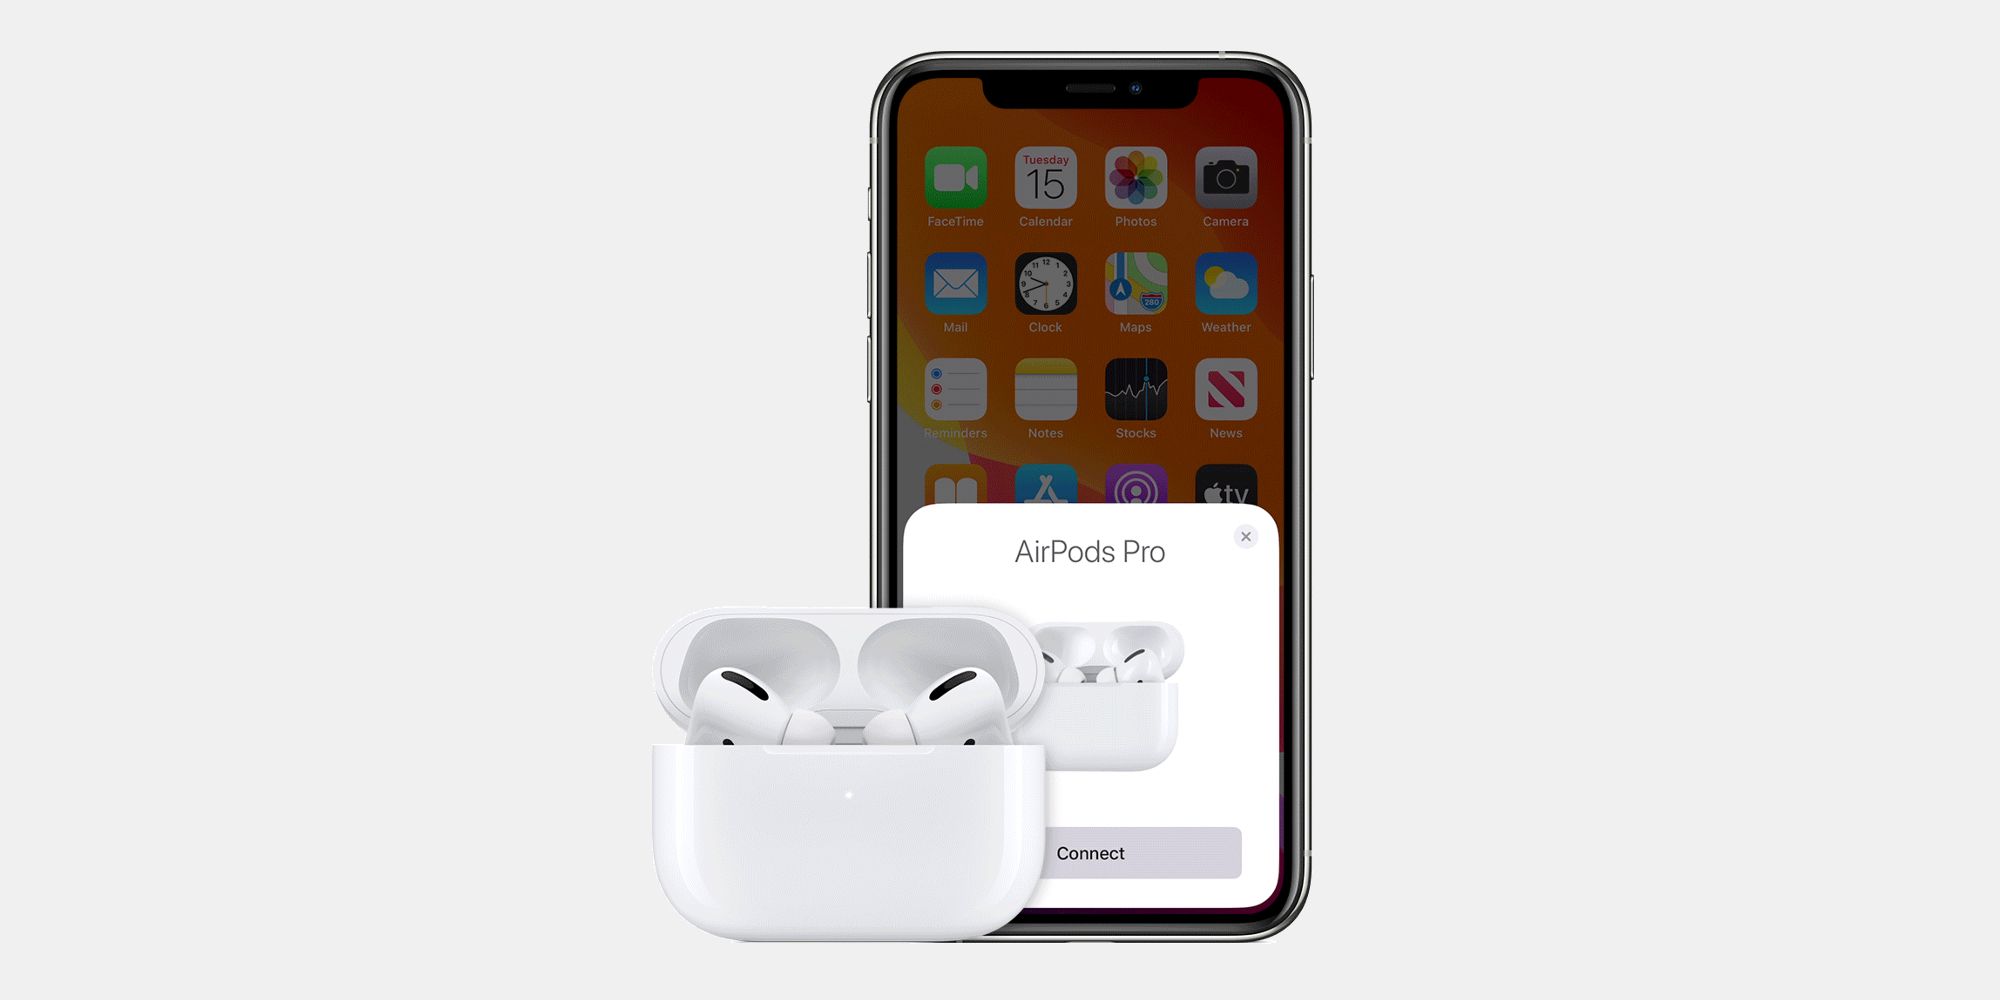 airpods wont connect to mac